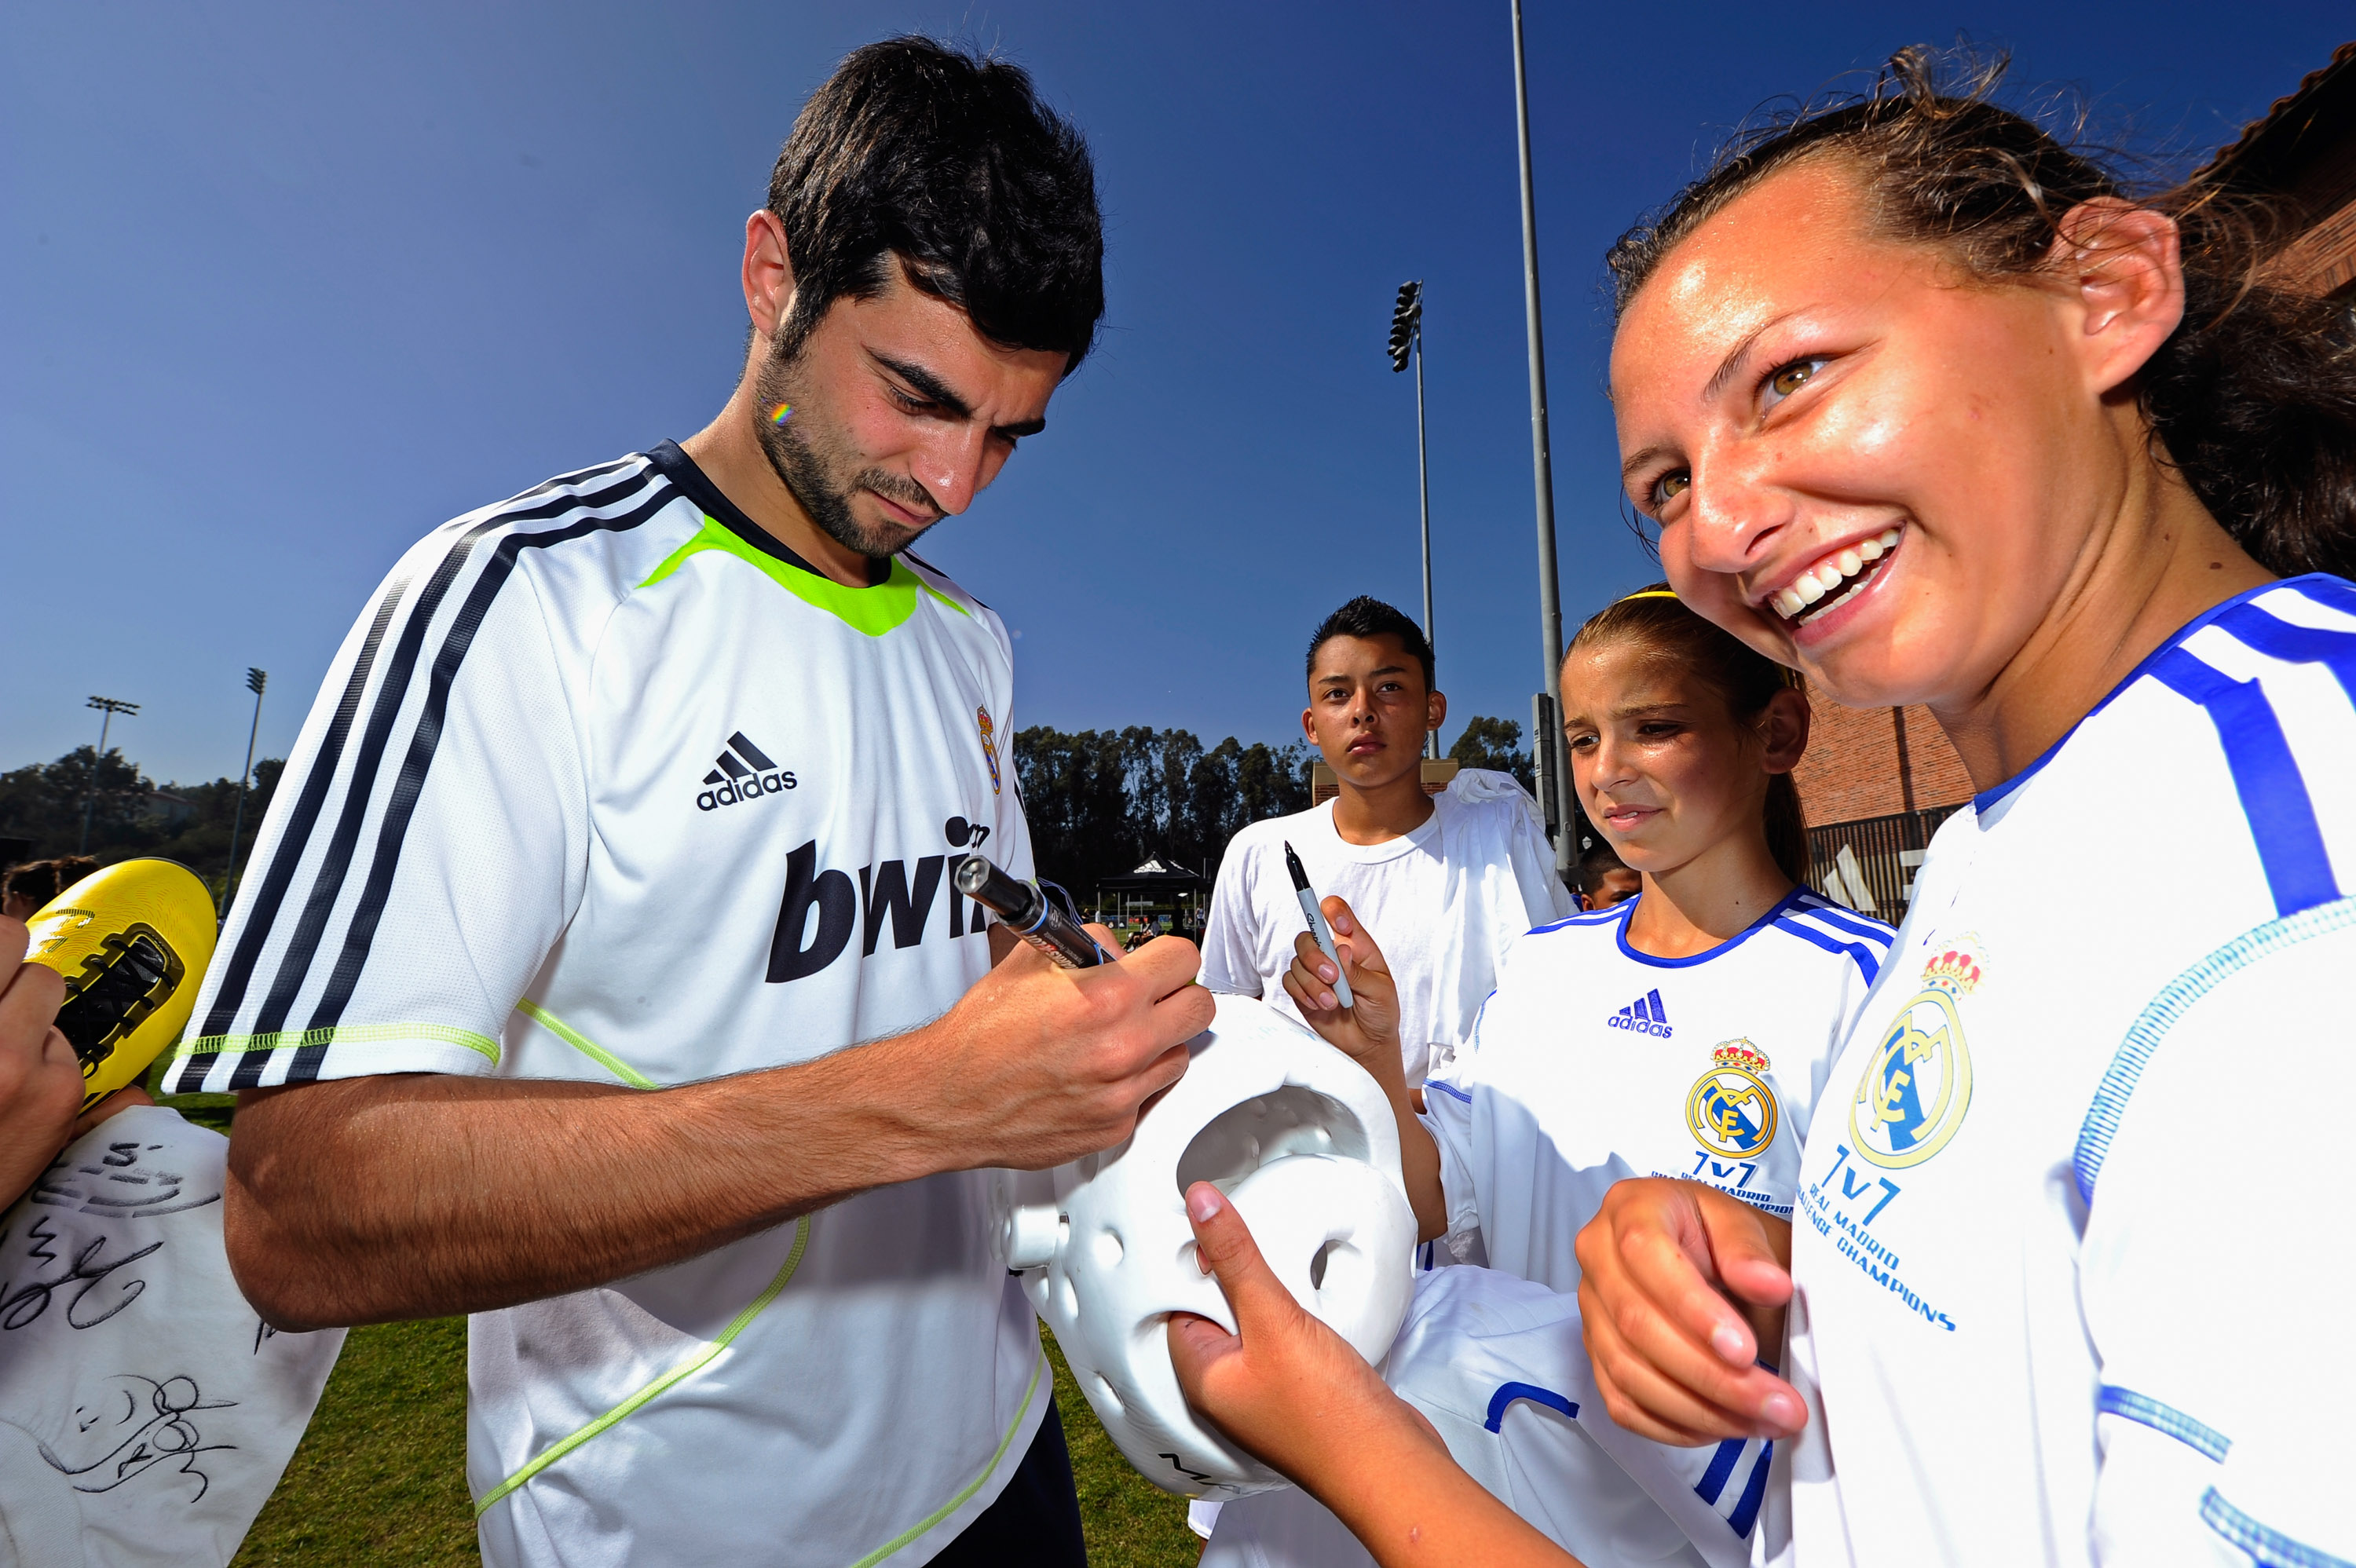 LOS ANGELES, CA - AUGUST 05:  Raul Albiol #18 of Real Madrid signs a soccer shirt for a local youth soccer player after participating in the Adidas training August 5, 2010 in Westwood section of Los Angeles, California. (Photo by Kevork Djansezian/Getty I